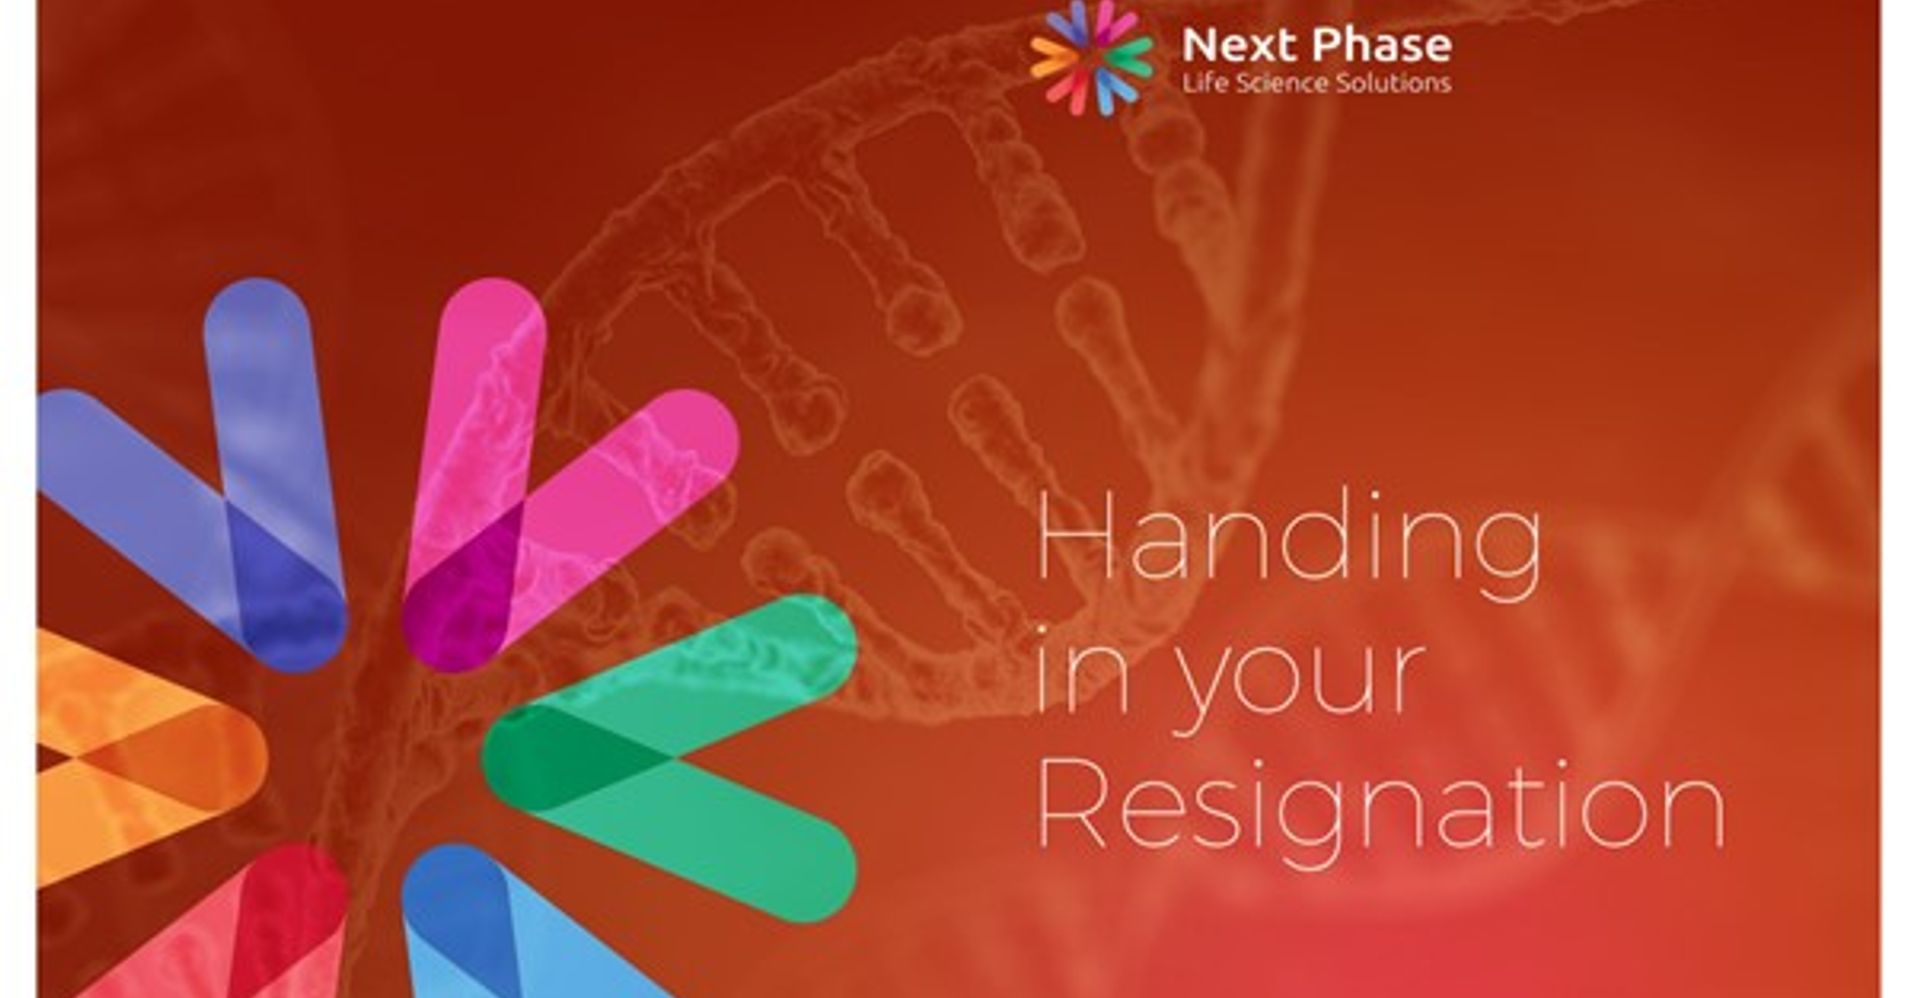 Next Phase - Handing In Your Resignation